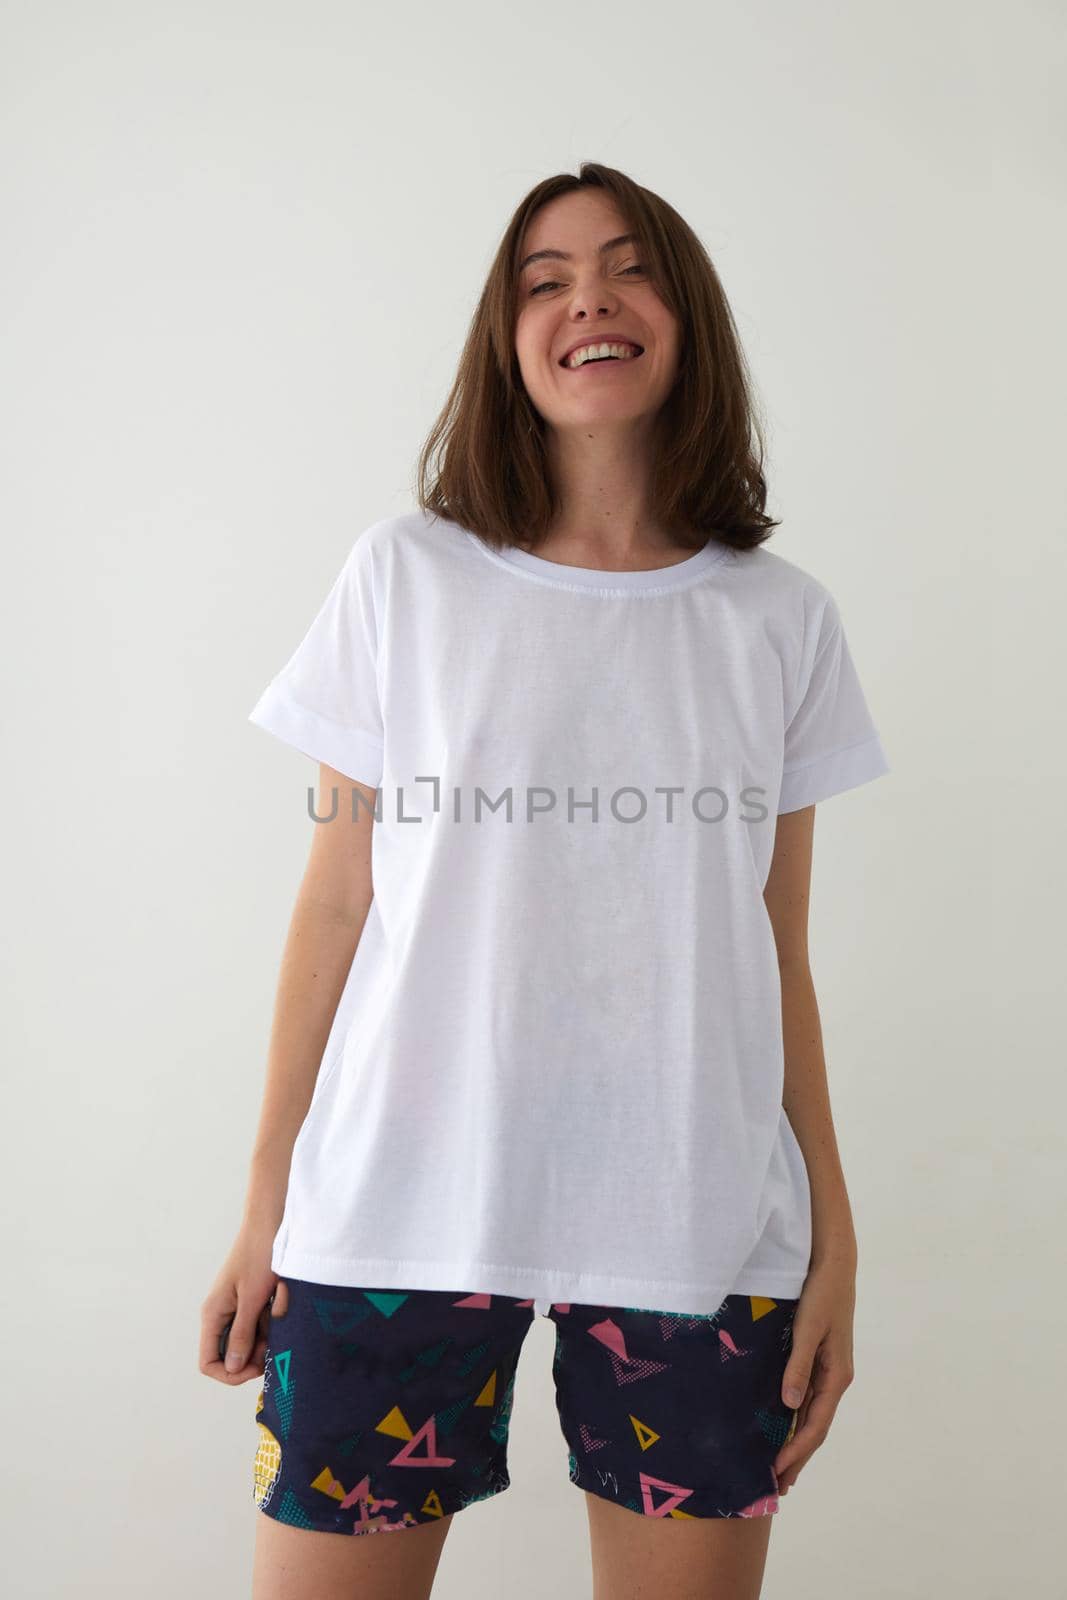 Delighted young female in white t shirt and shorts standing on white background in studio and looking at camera